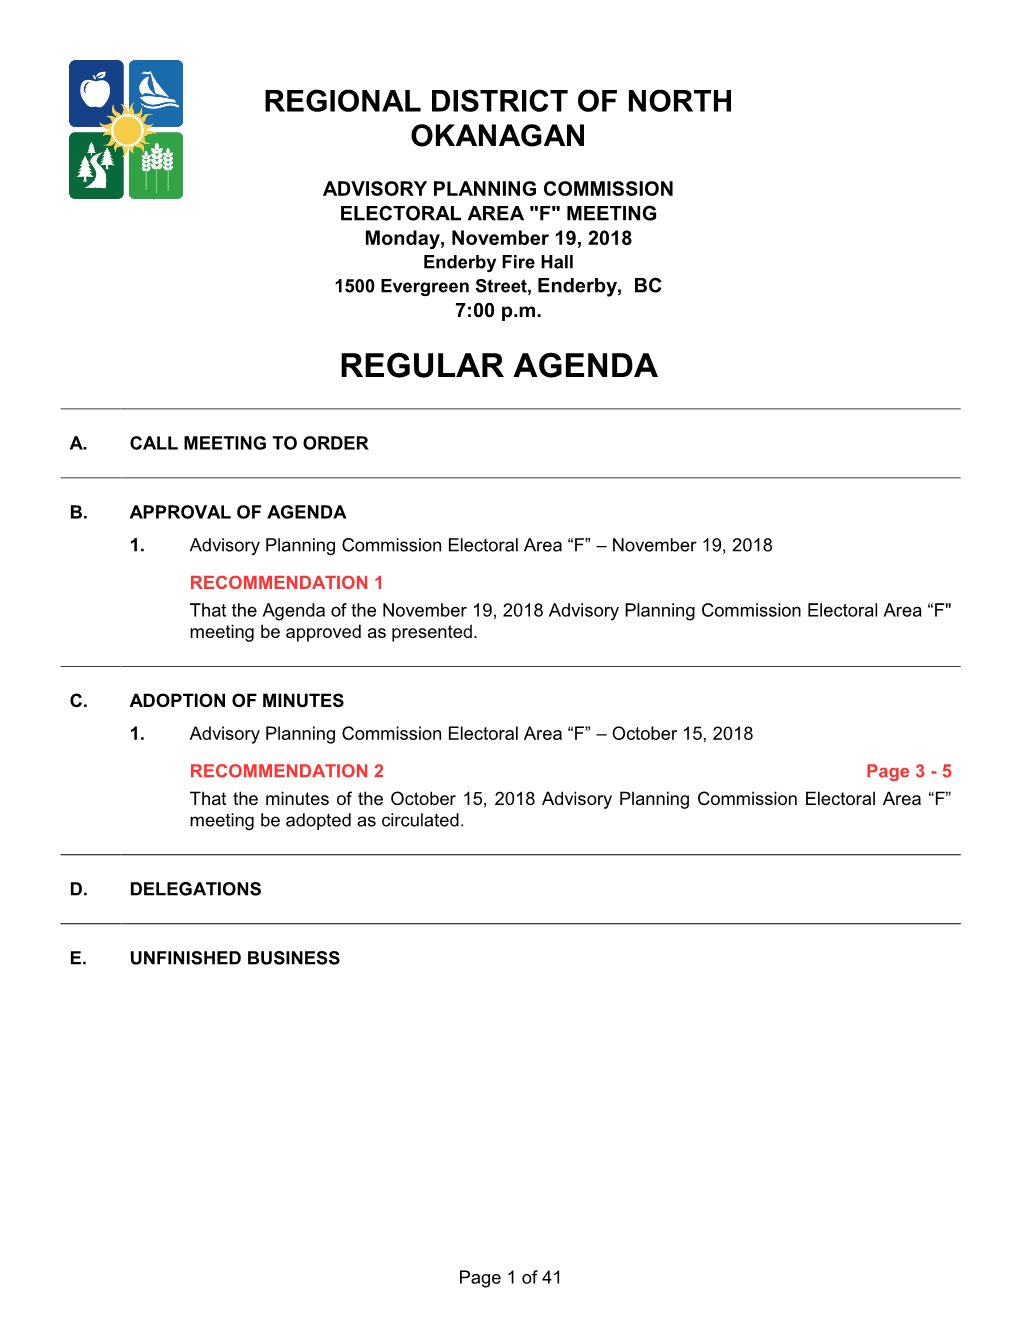 ADVISORY PLANNING COMMISSION ELECTORAL AREA "F" MEETING Monday, November 19, 2018 Enderby Fire Hall 1500 Evergreen Street, Enderby, BC 7:00 P.M